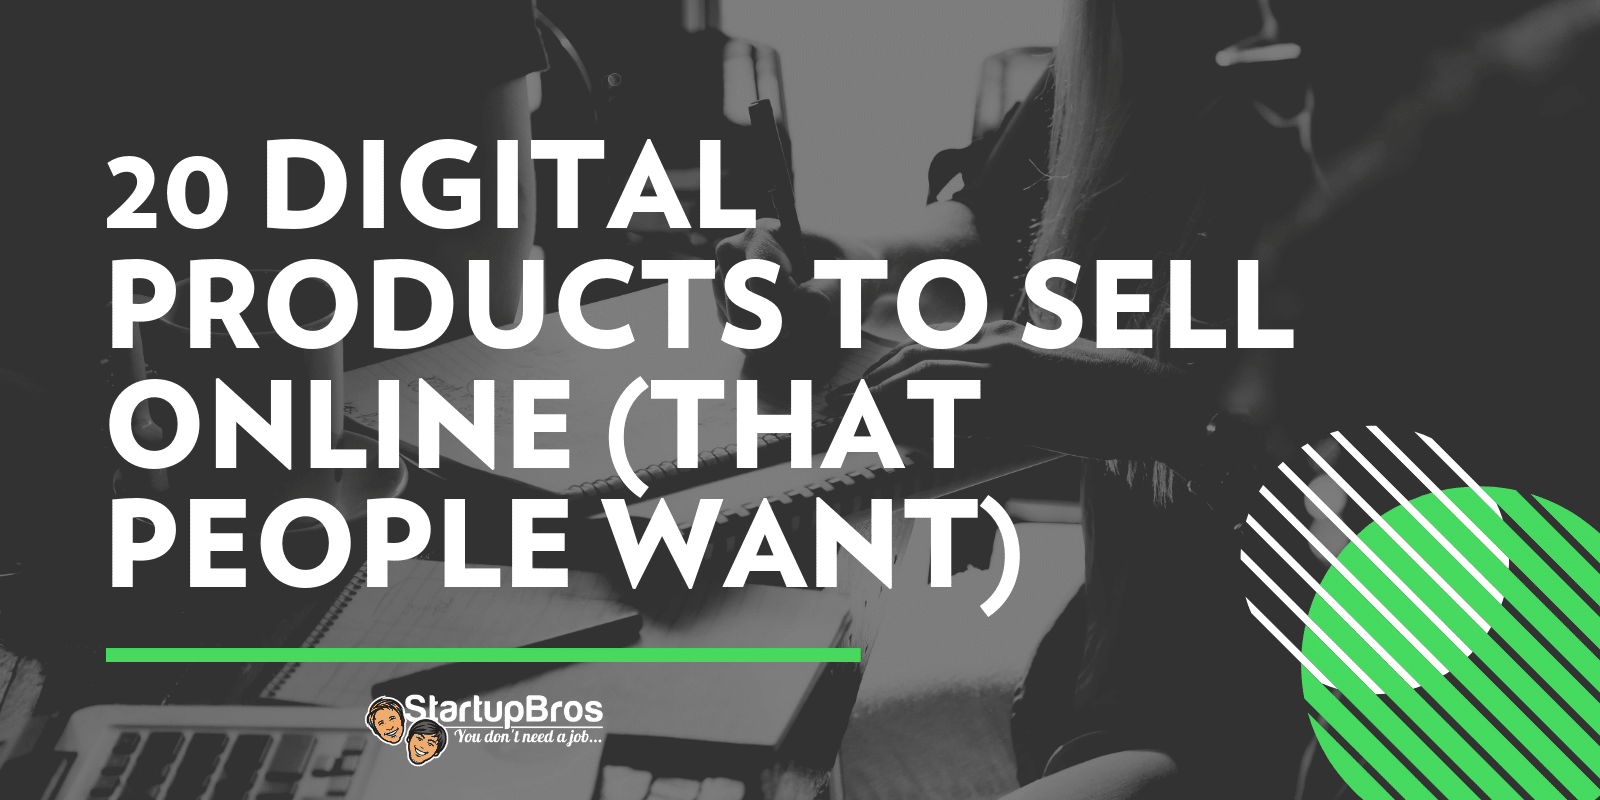 https://startupbros.com/wp-content/uploads/2019/09/20-Digital-Products-to-Sell-Online-That-People-Want-social-share.png